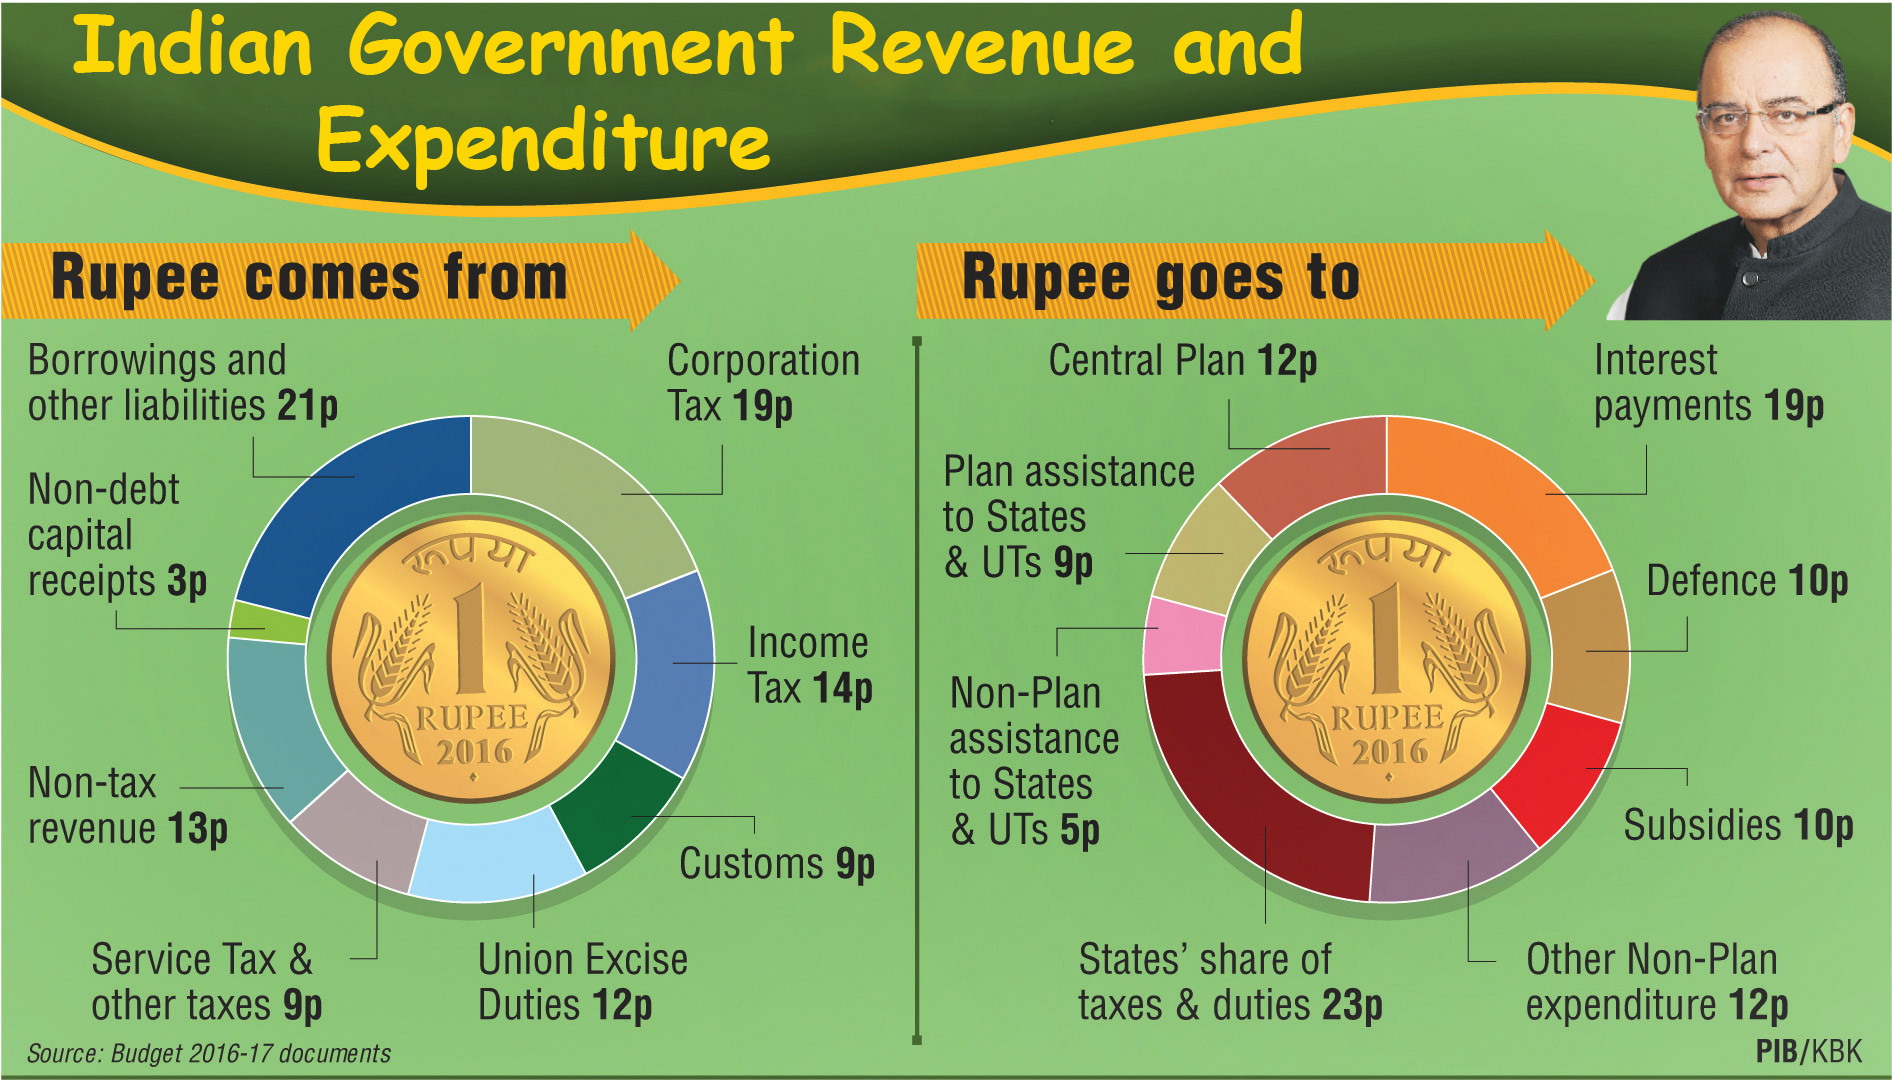 revenue and expenditure sources of govt of india